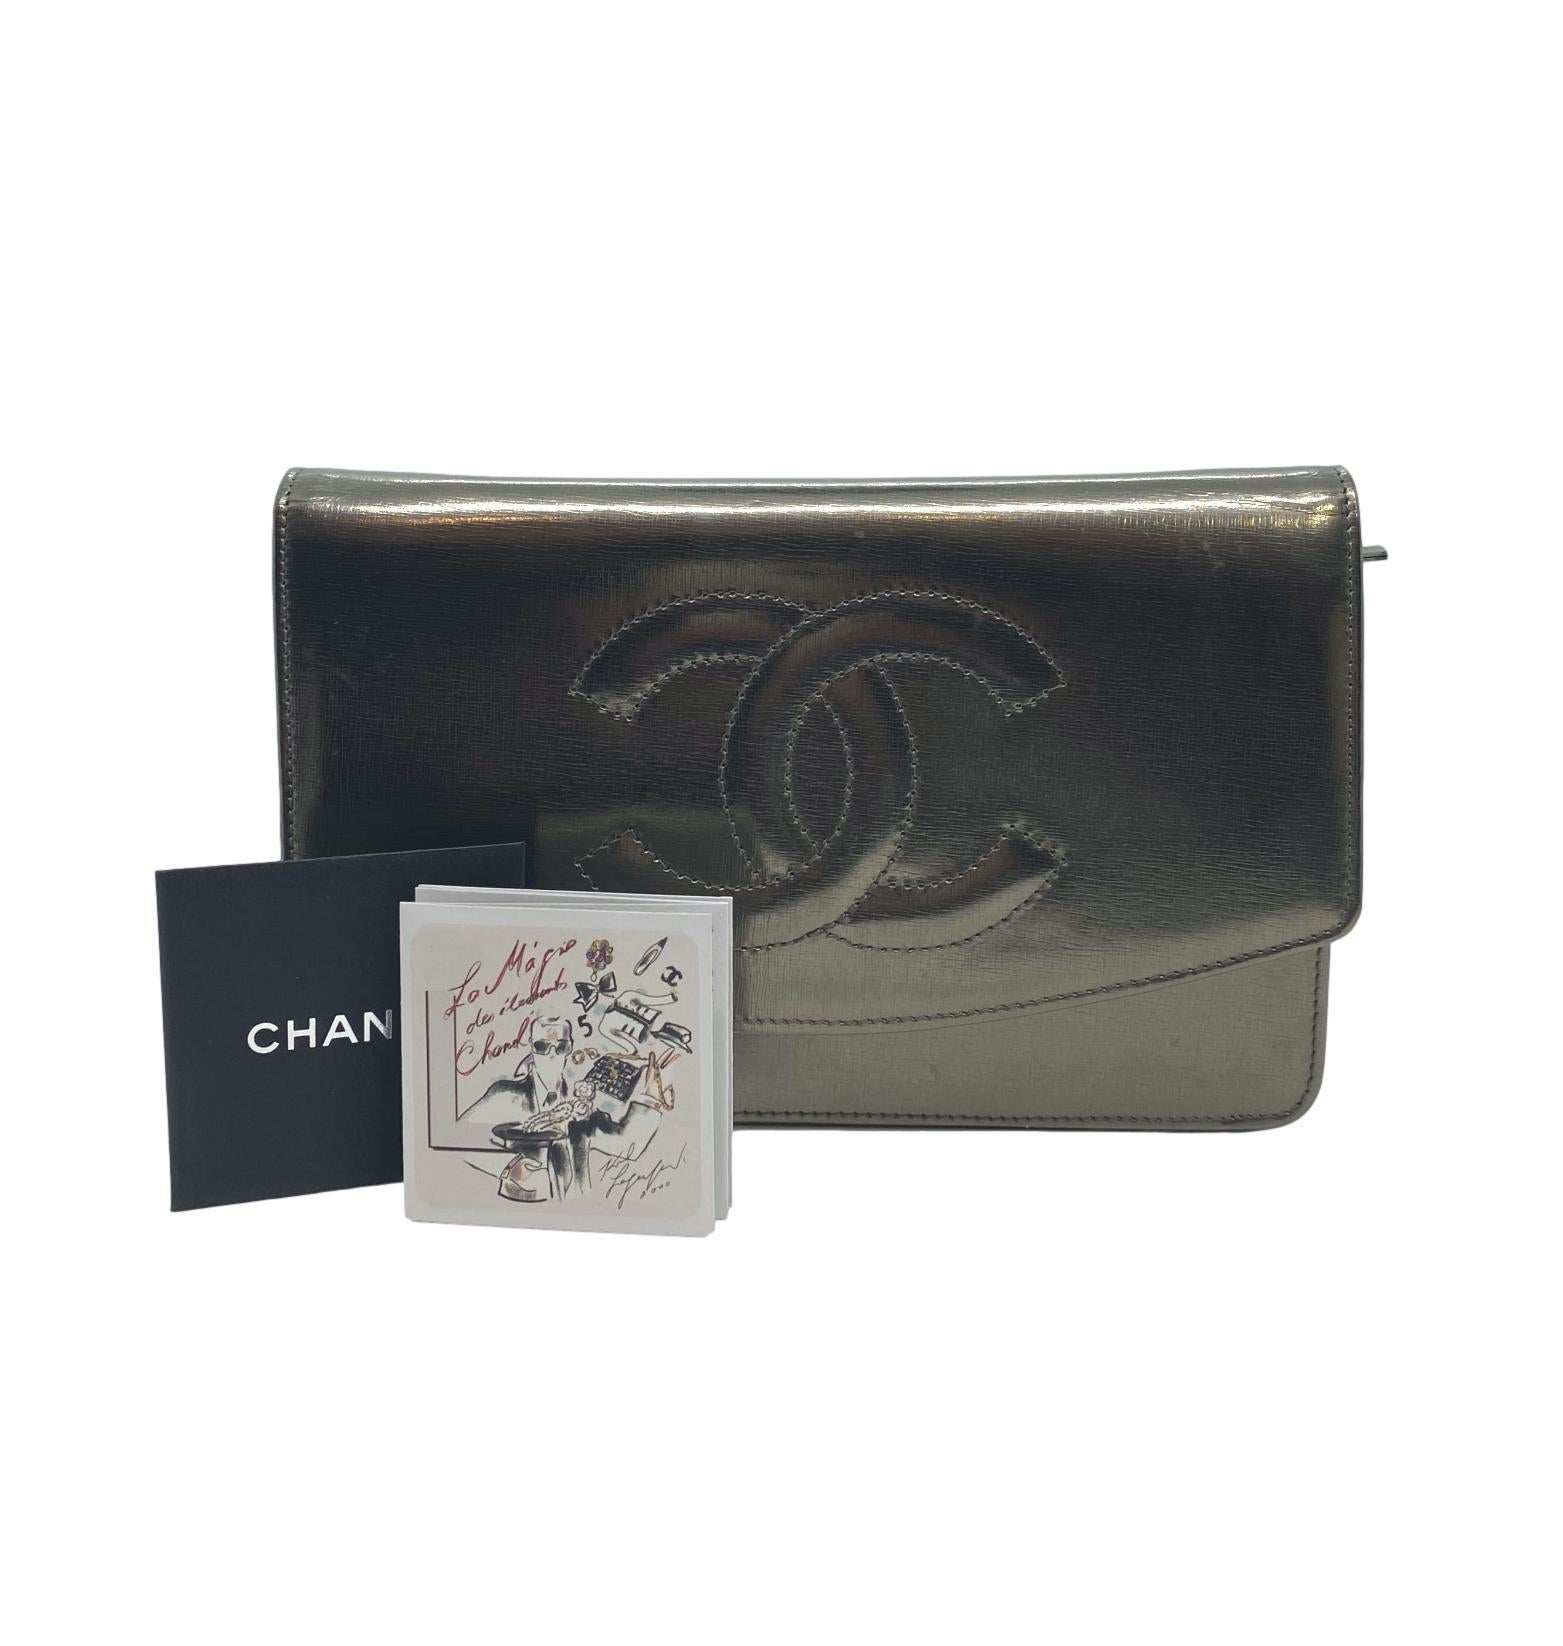 Chanel Timeless Metallic Leather Wallet on Chain Shoulder Clutch Bag with Palladium Hardware. Exceptionally made, this highly sought after and popular piece was produced between 2008 - 2009 under the direction of Karl Lagerfield baring a serial code